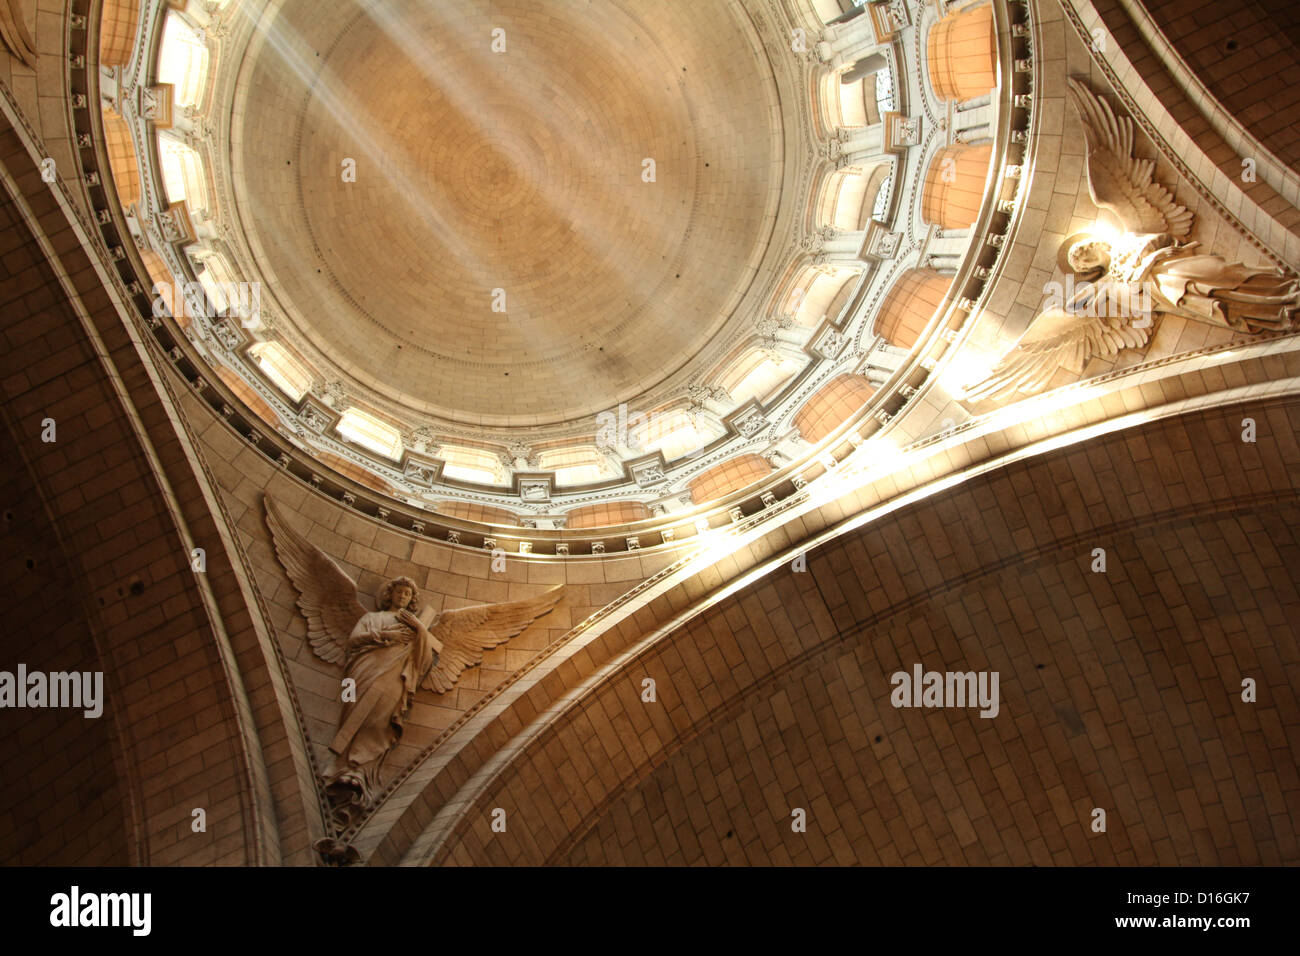 Filtered sunlight lights up angels and dome of Sacre Coeur Basilica, Paris, France Stock Photo